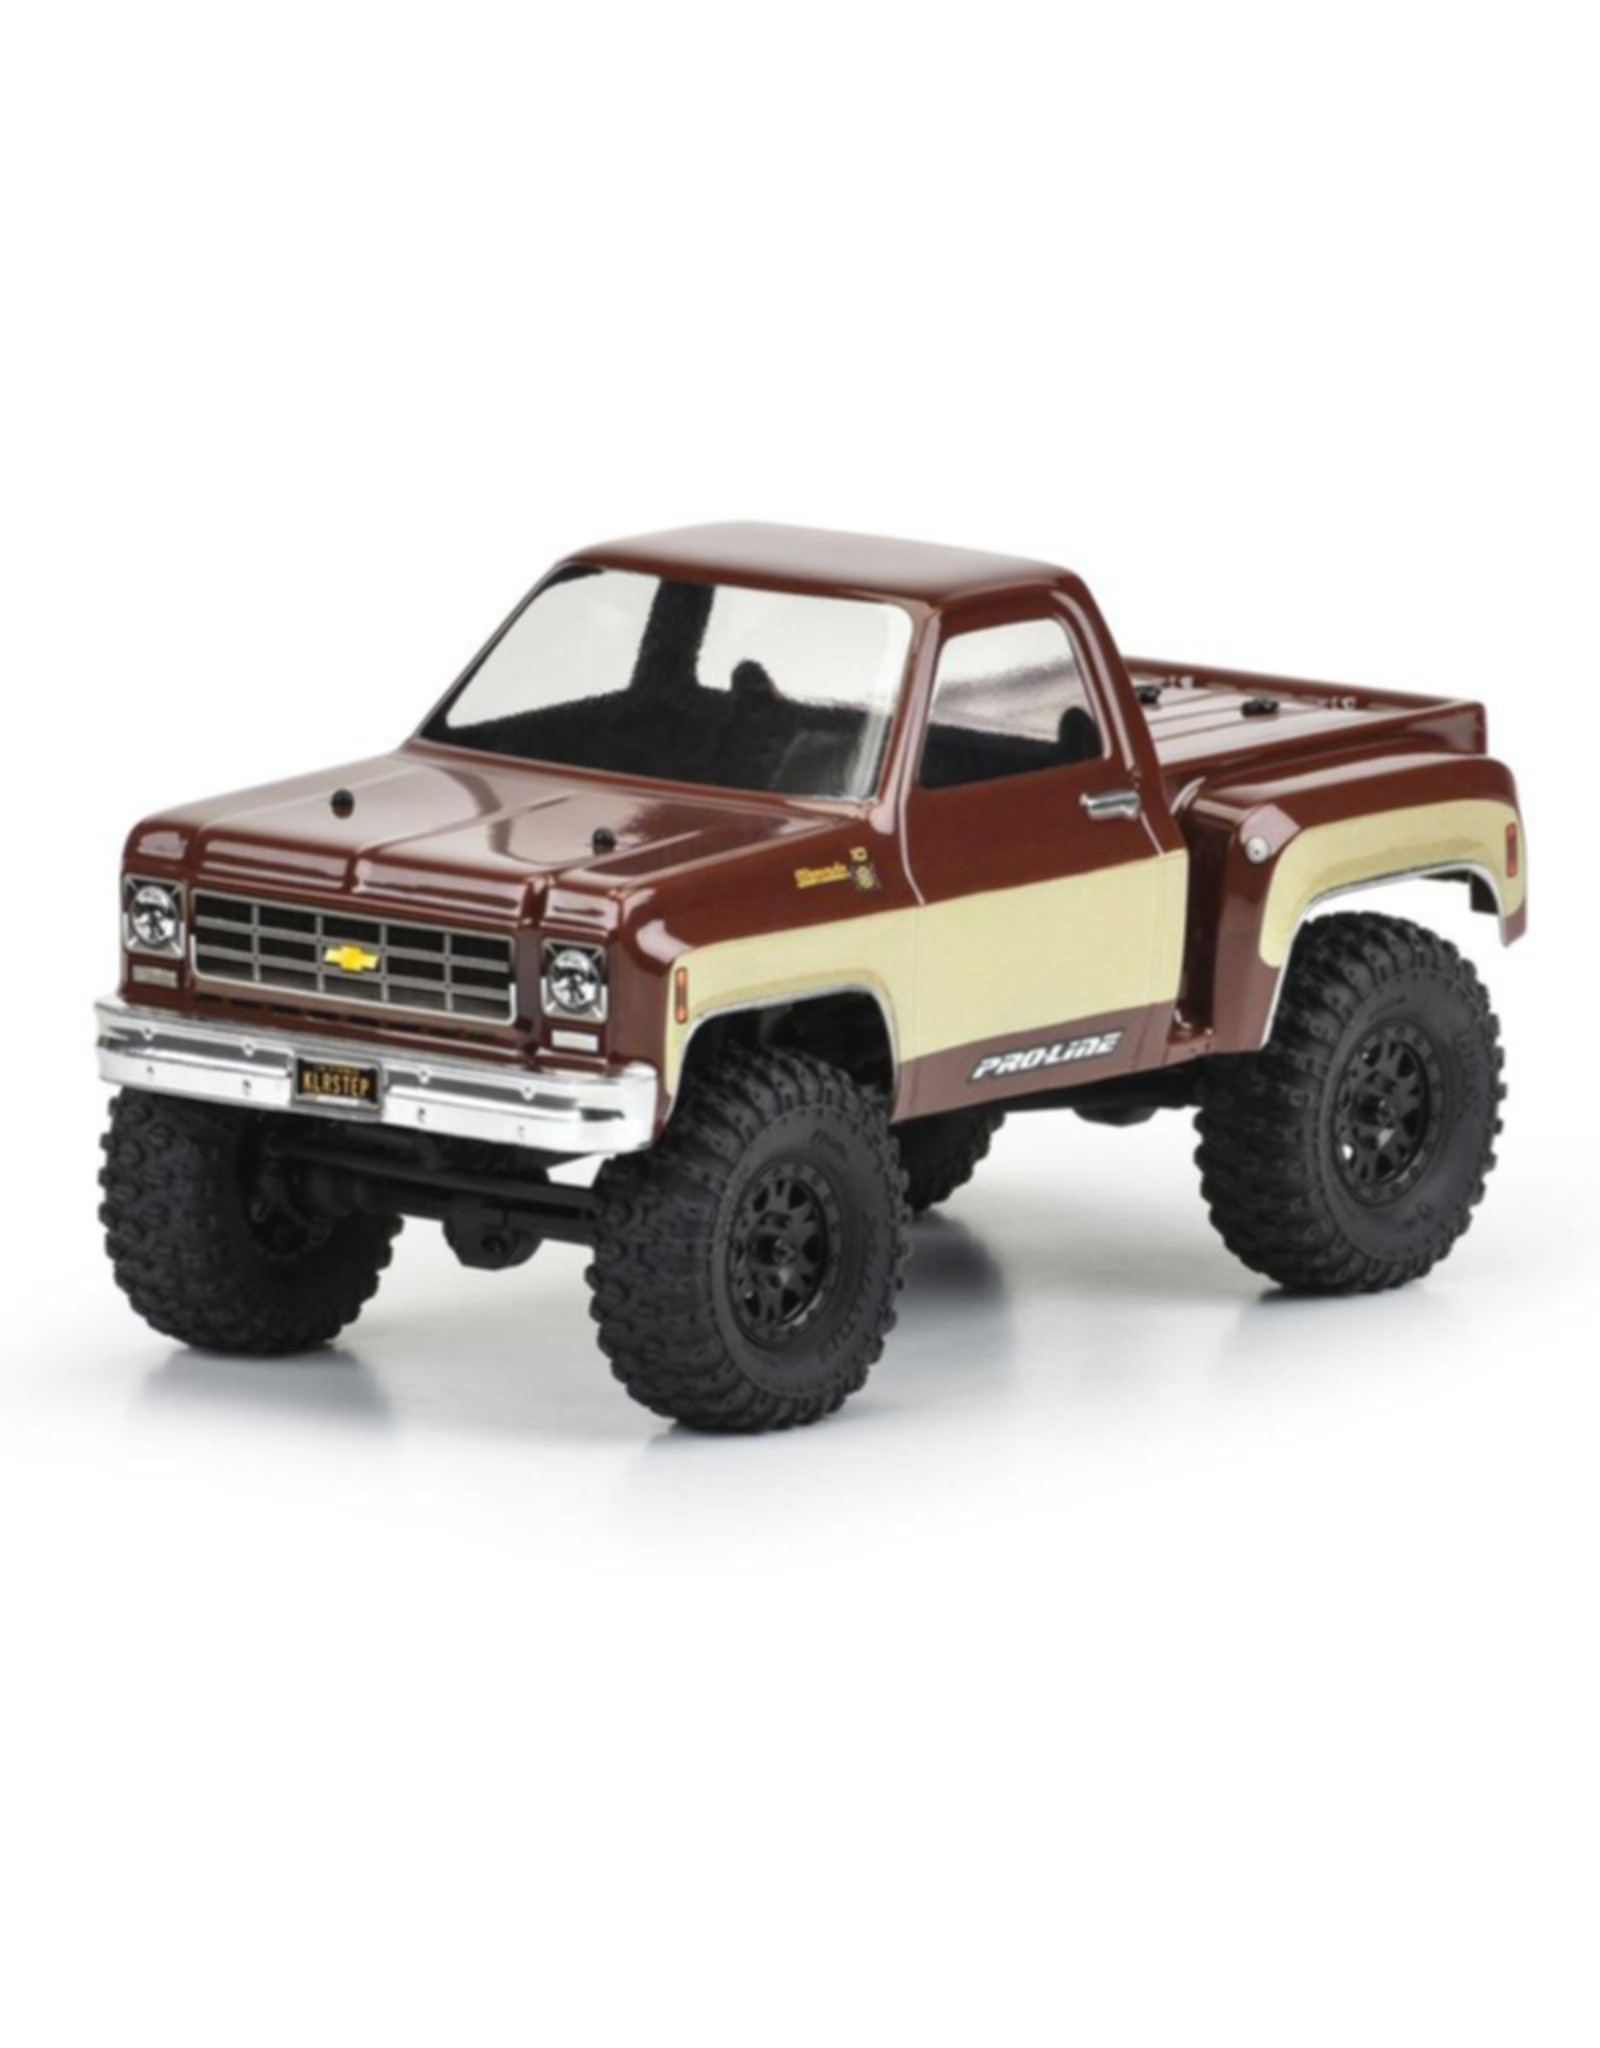 Pro-Line Racing PRO358300 1/24 1978 Chevy K-10 Clear Body: SCX24